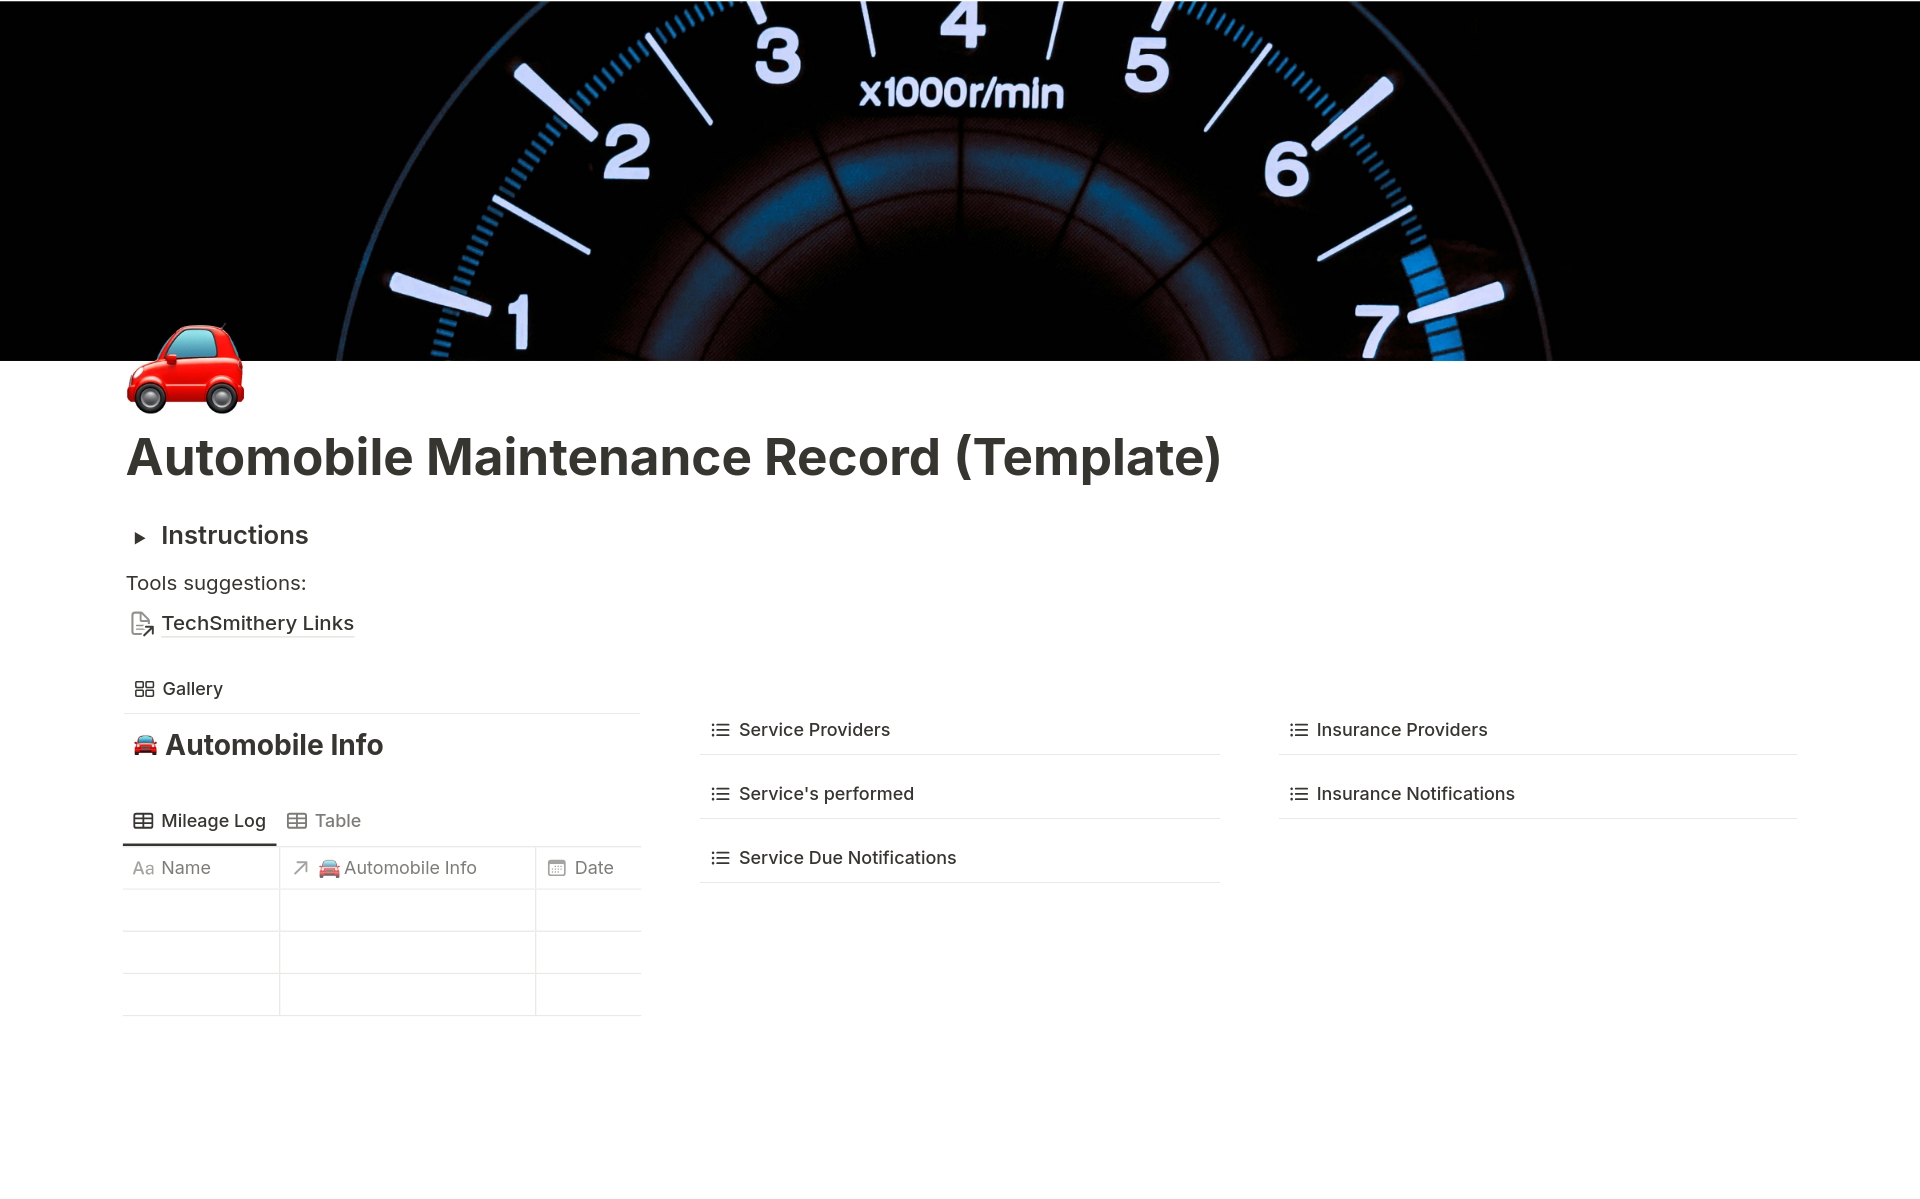 A template to track important information about your vehicle. Track maintenance, repair, and provide reminders for recurring maintenance. 